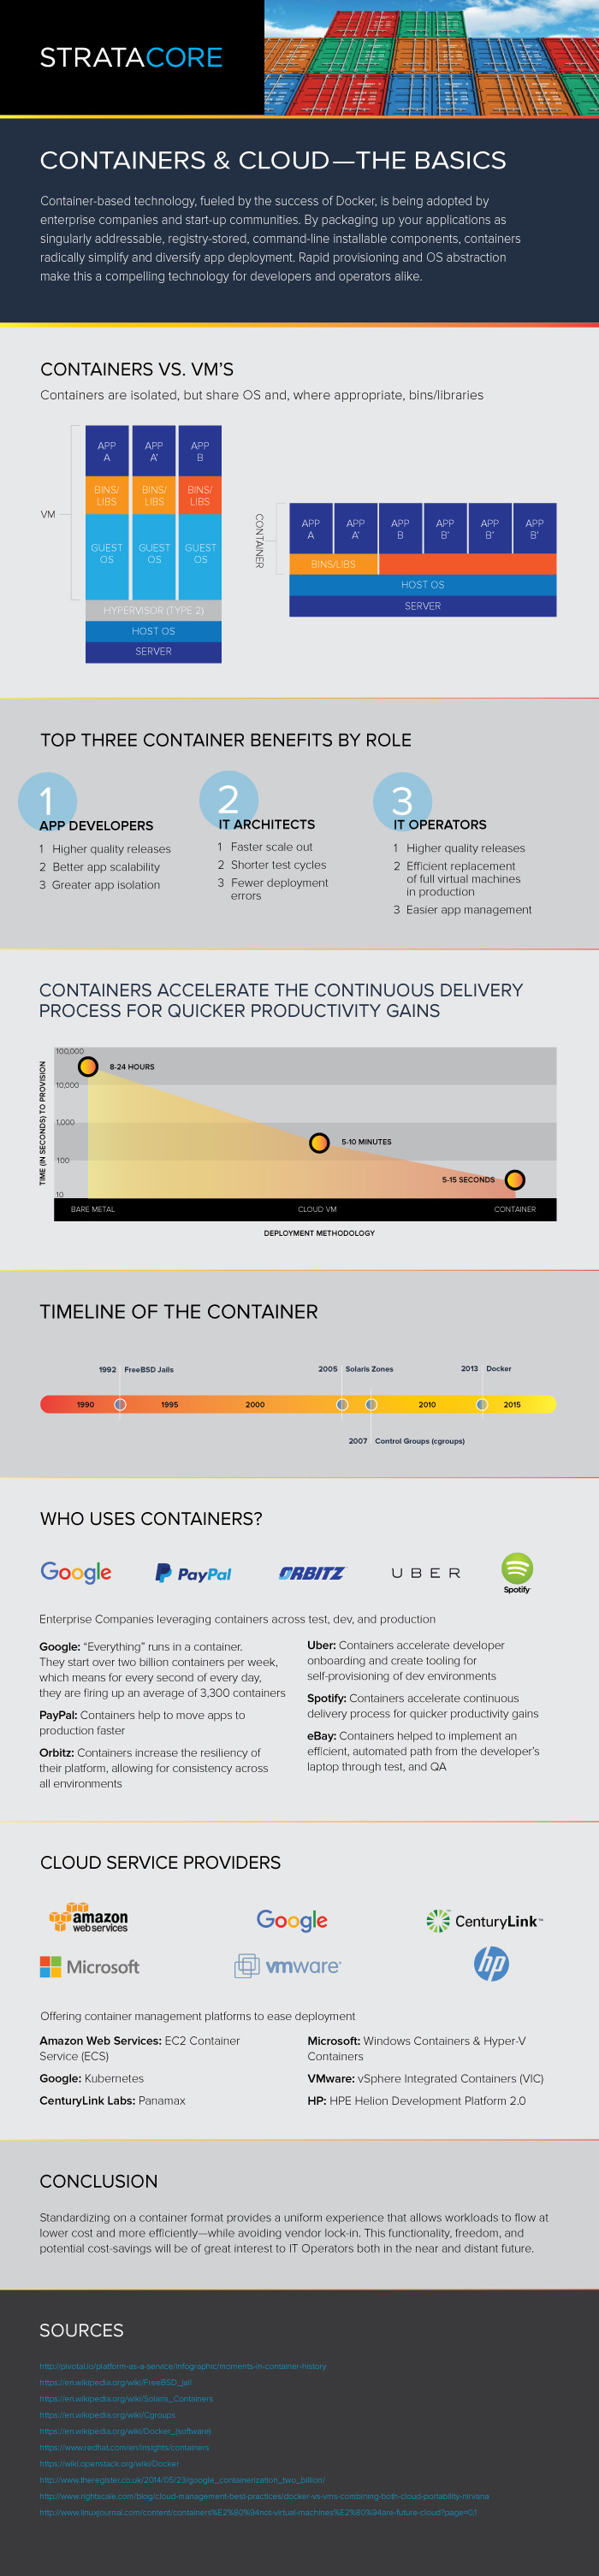 Container-Infographic-final.jpg